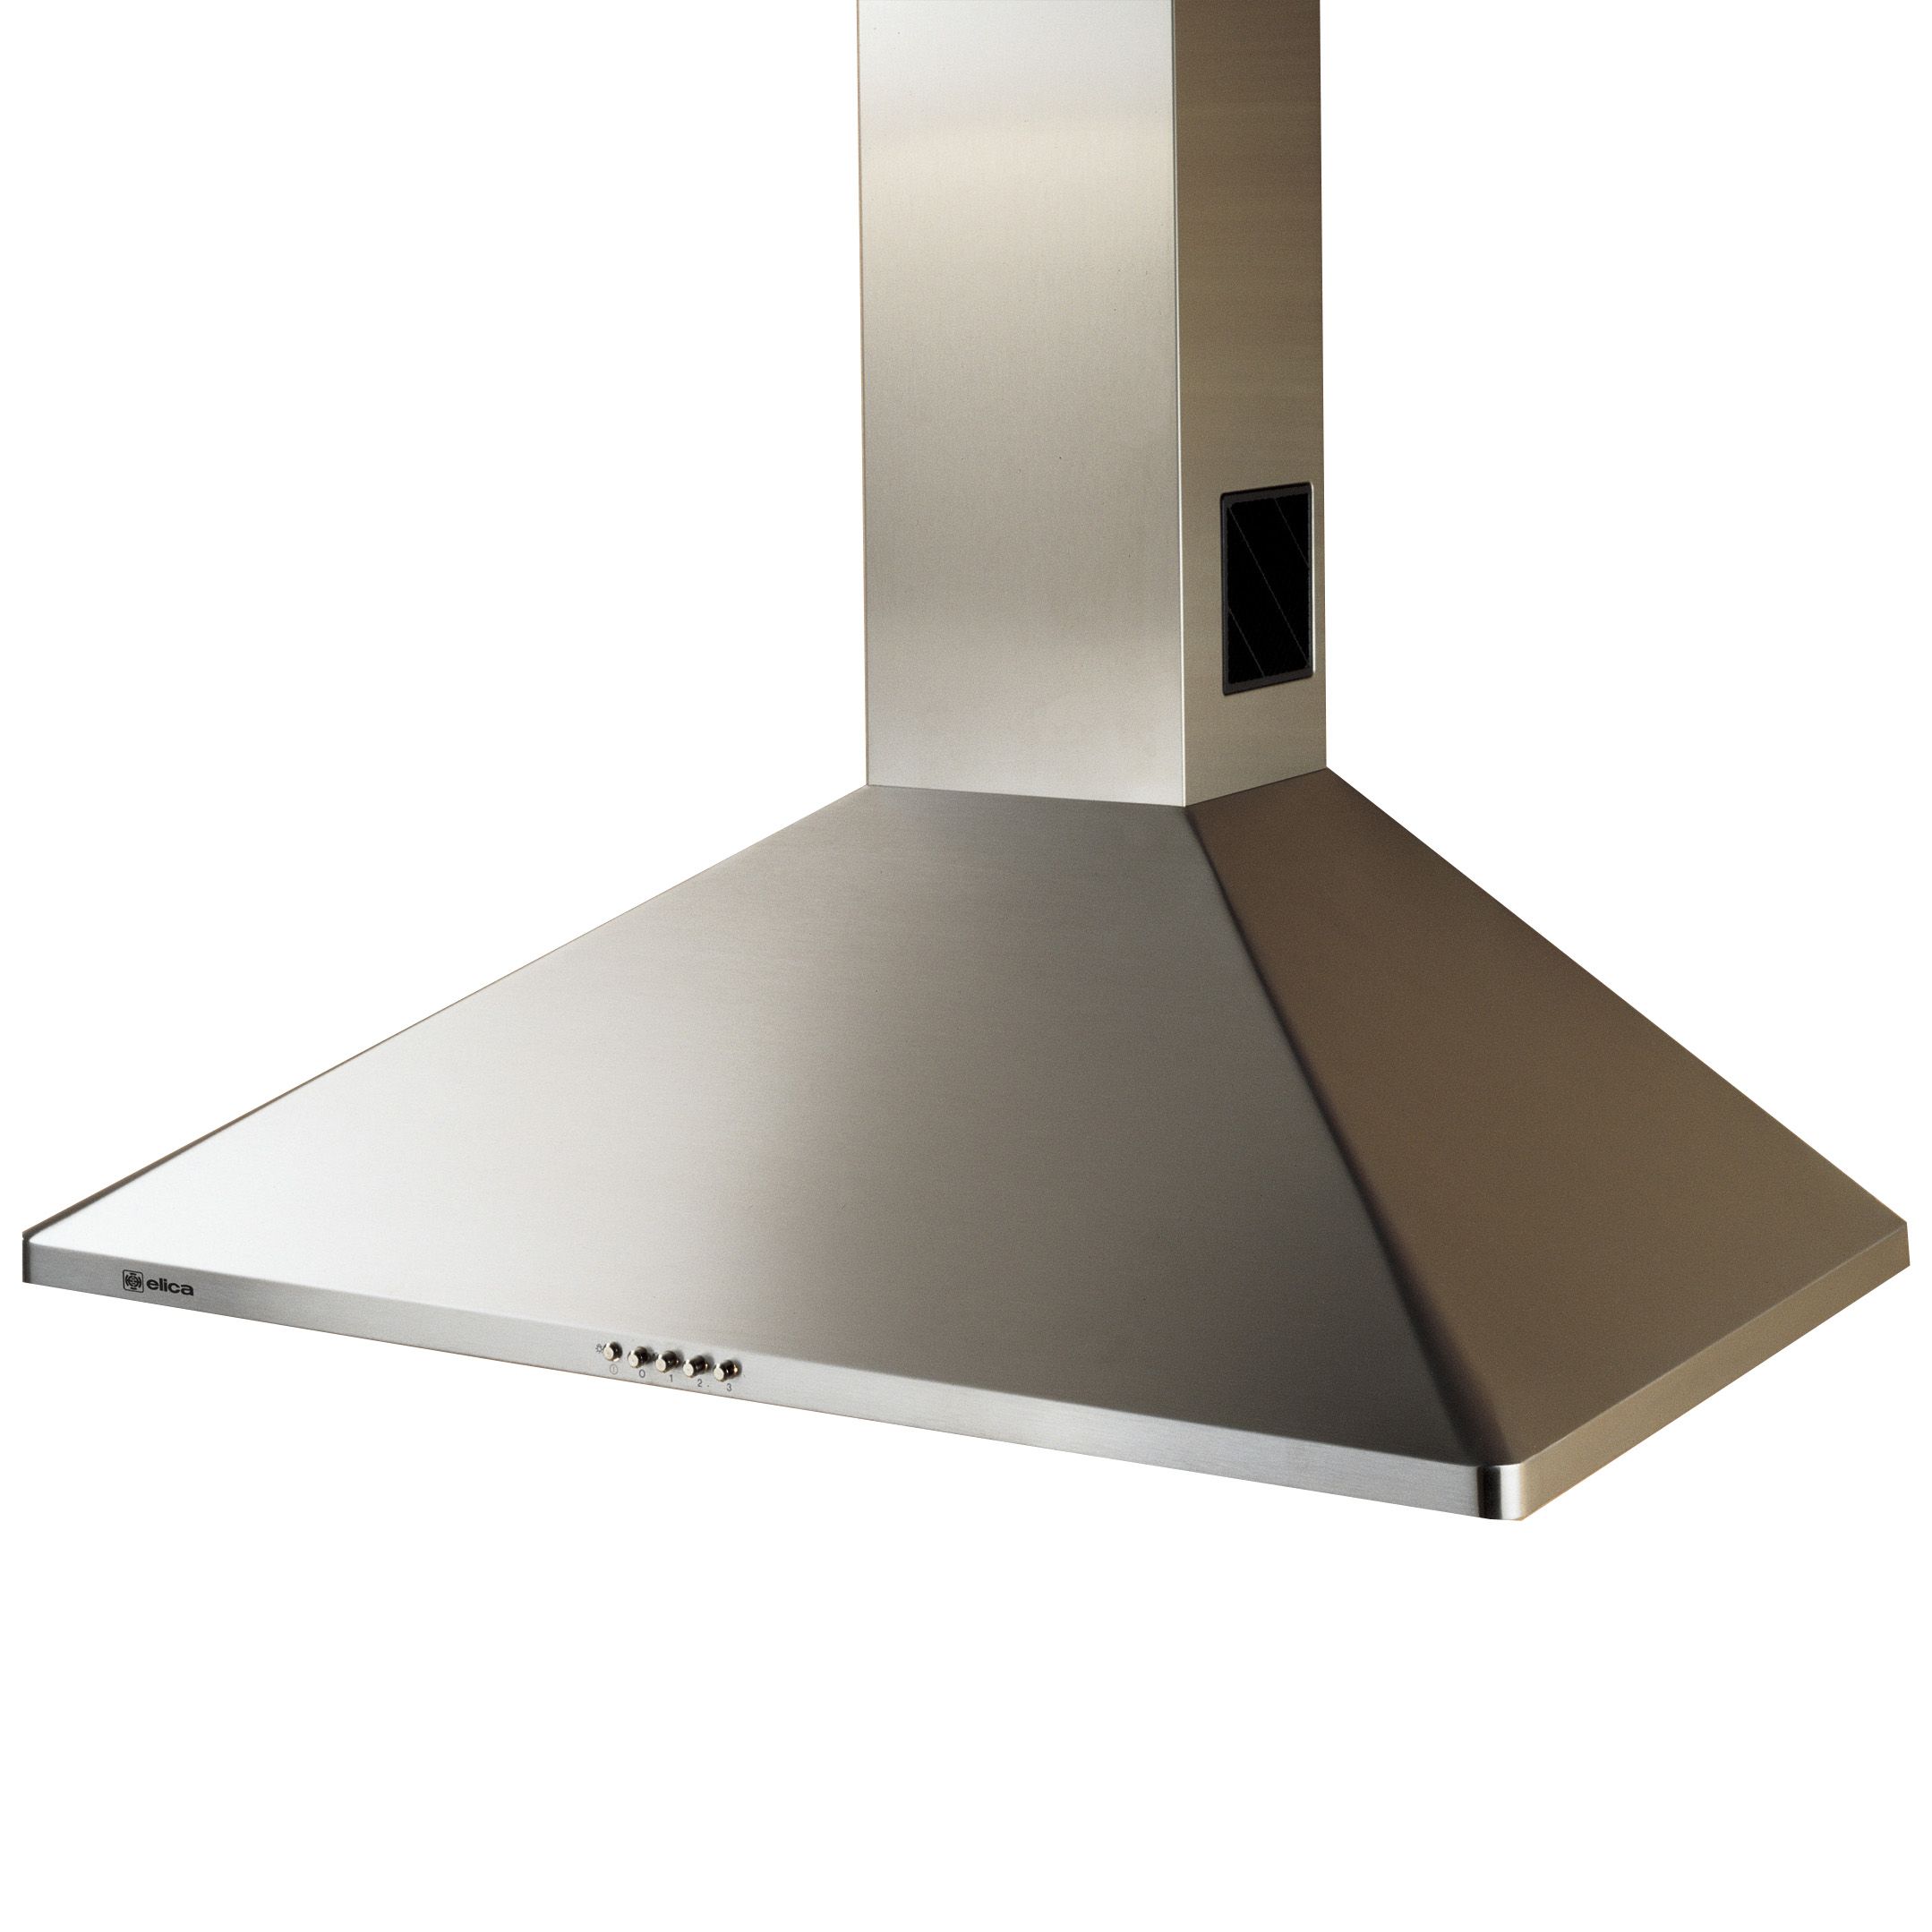 Elica Concept Key 60 Chimney Cooker Hood, Stainless Steel at John Lewis